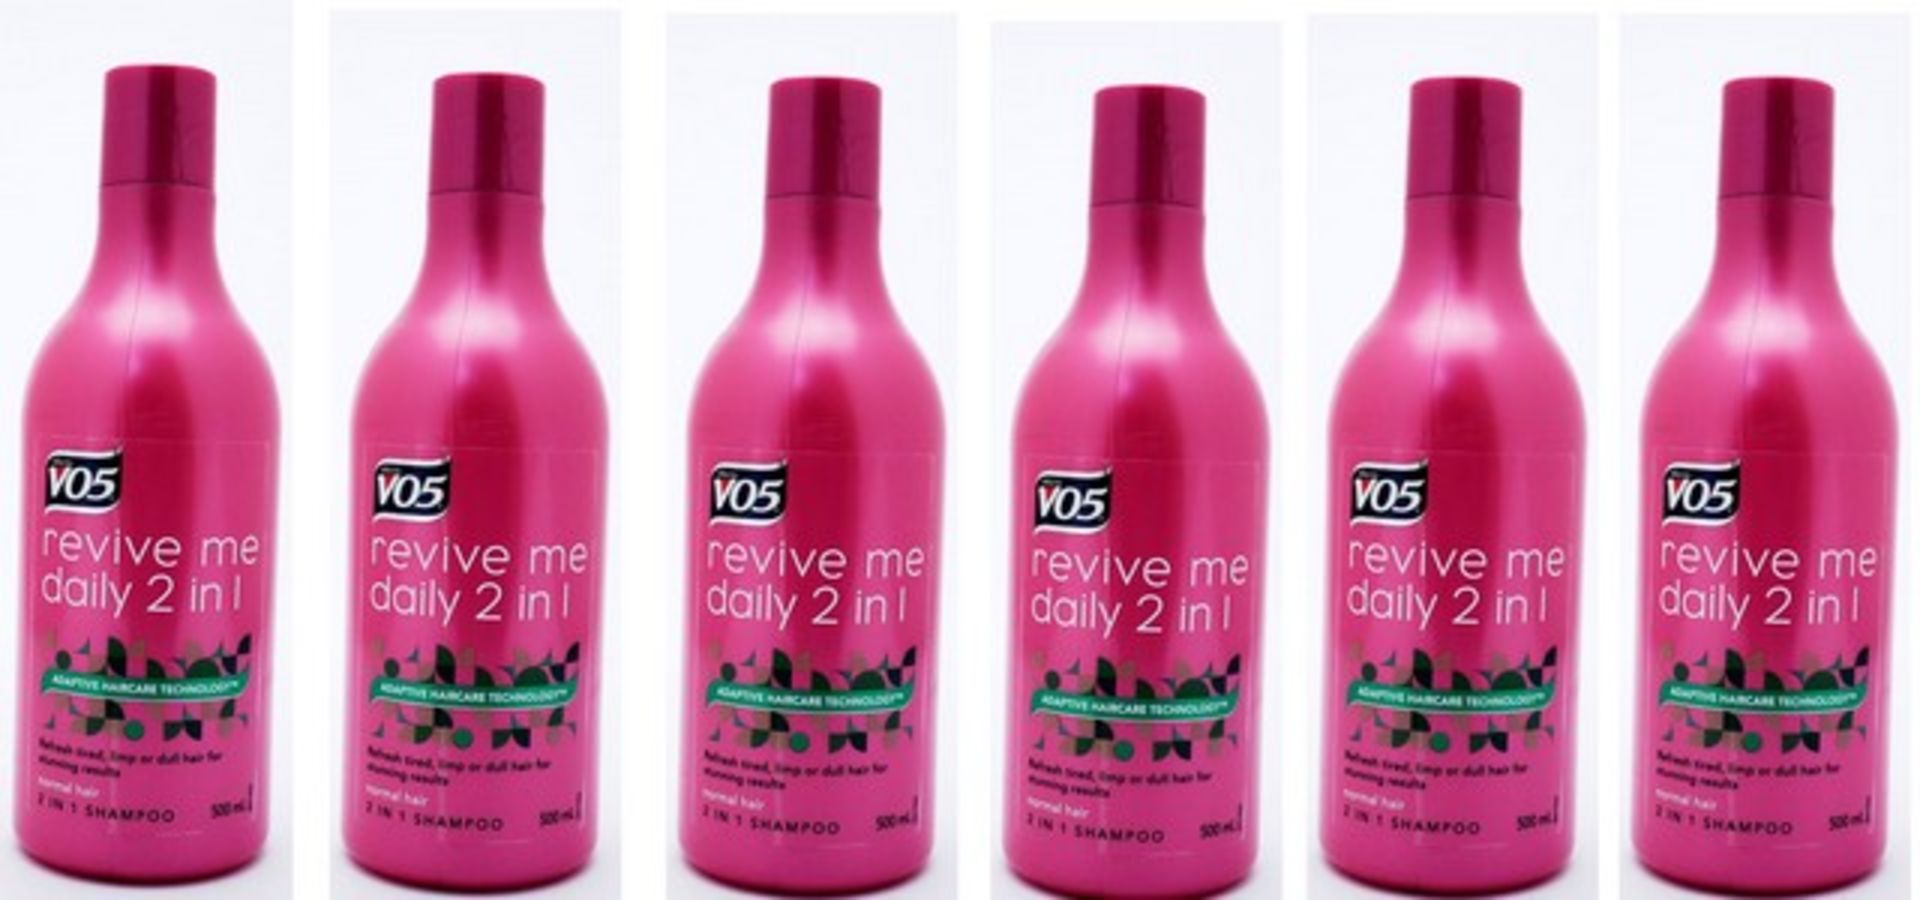 V Brand New A Lot Of Six 500ml VO5 Revive Me Daily 2 In 1 Shampoo/Conditioner